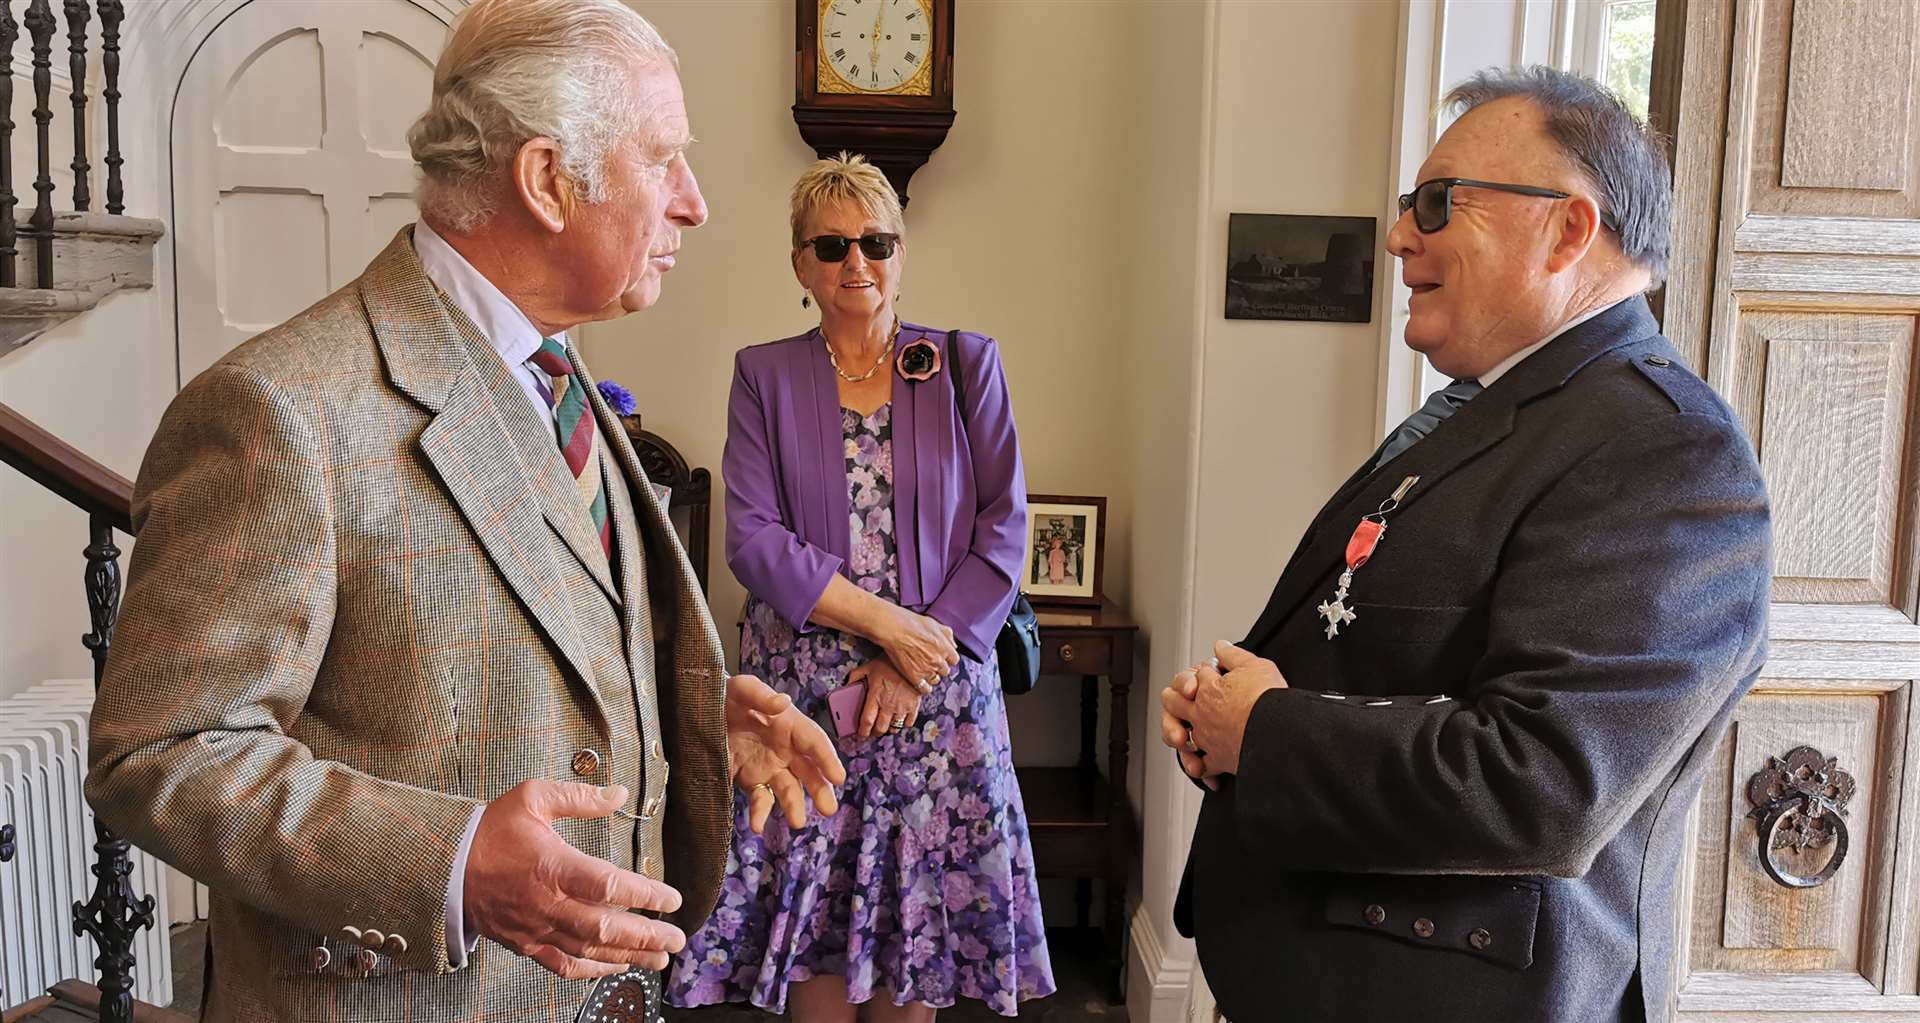 Prince Charles, the Duke of Rothesay, presenting David Flear with his MBE in the foyer of the Castle of Mey, with Mr Flear's wife Helen looking on.